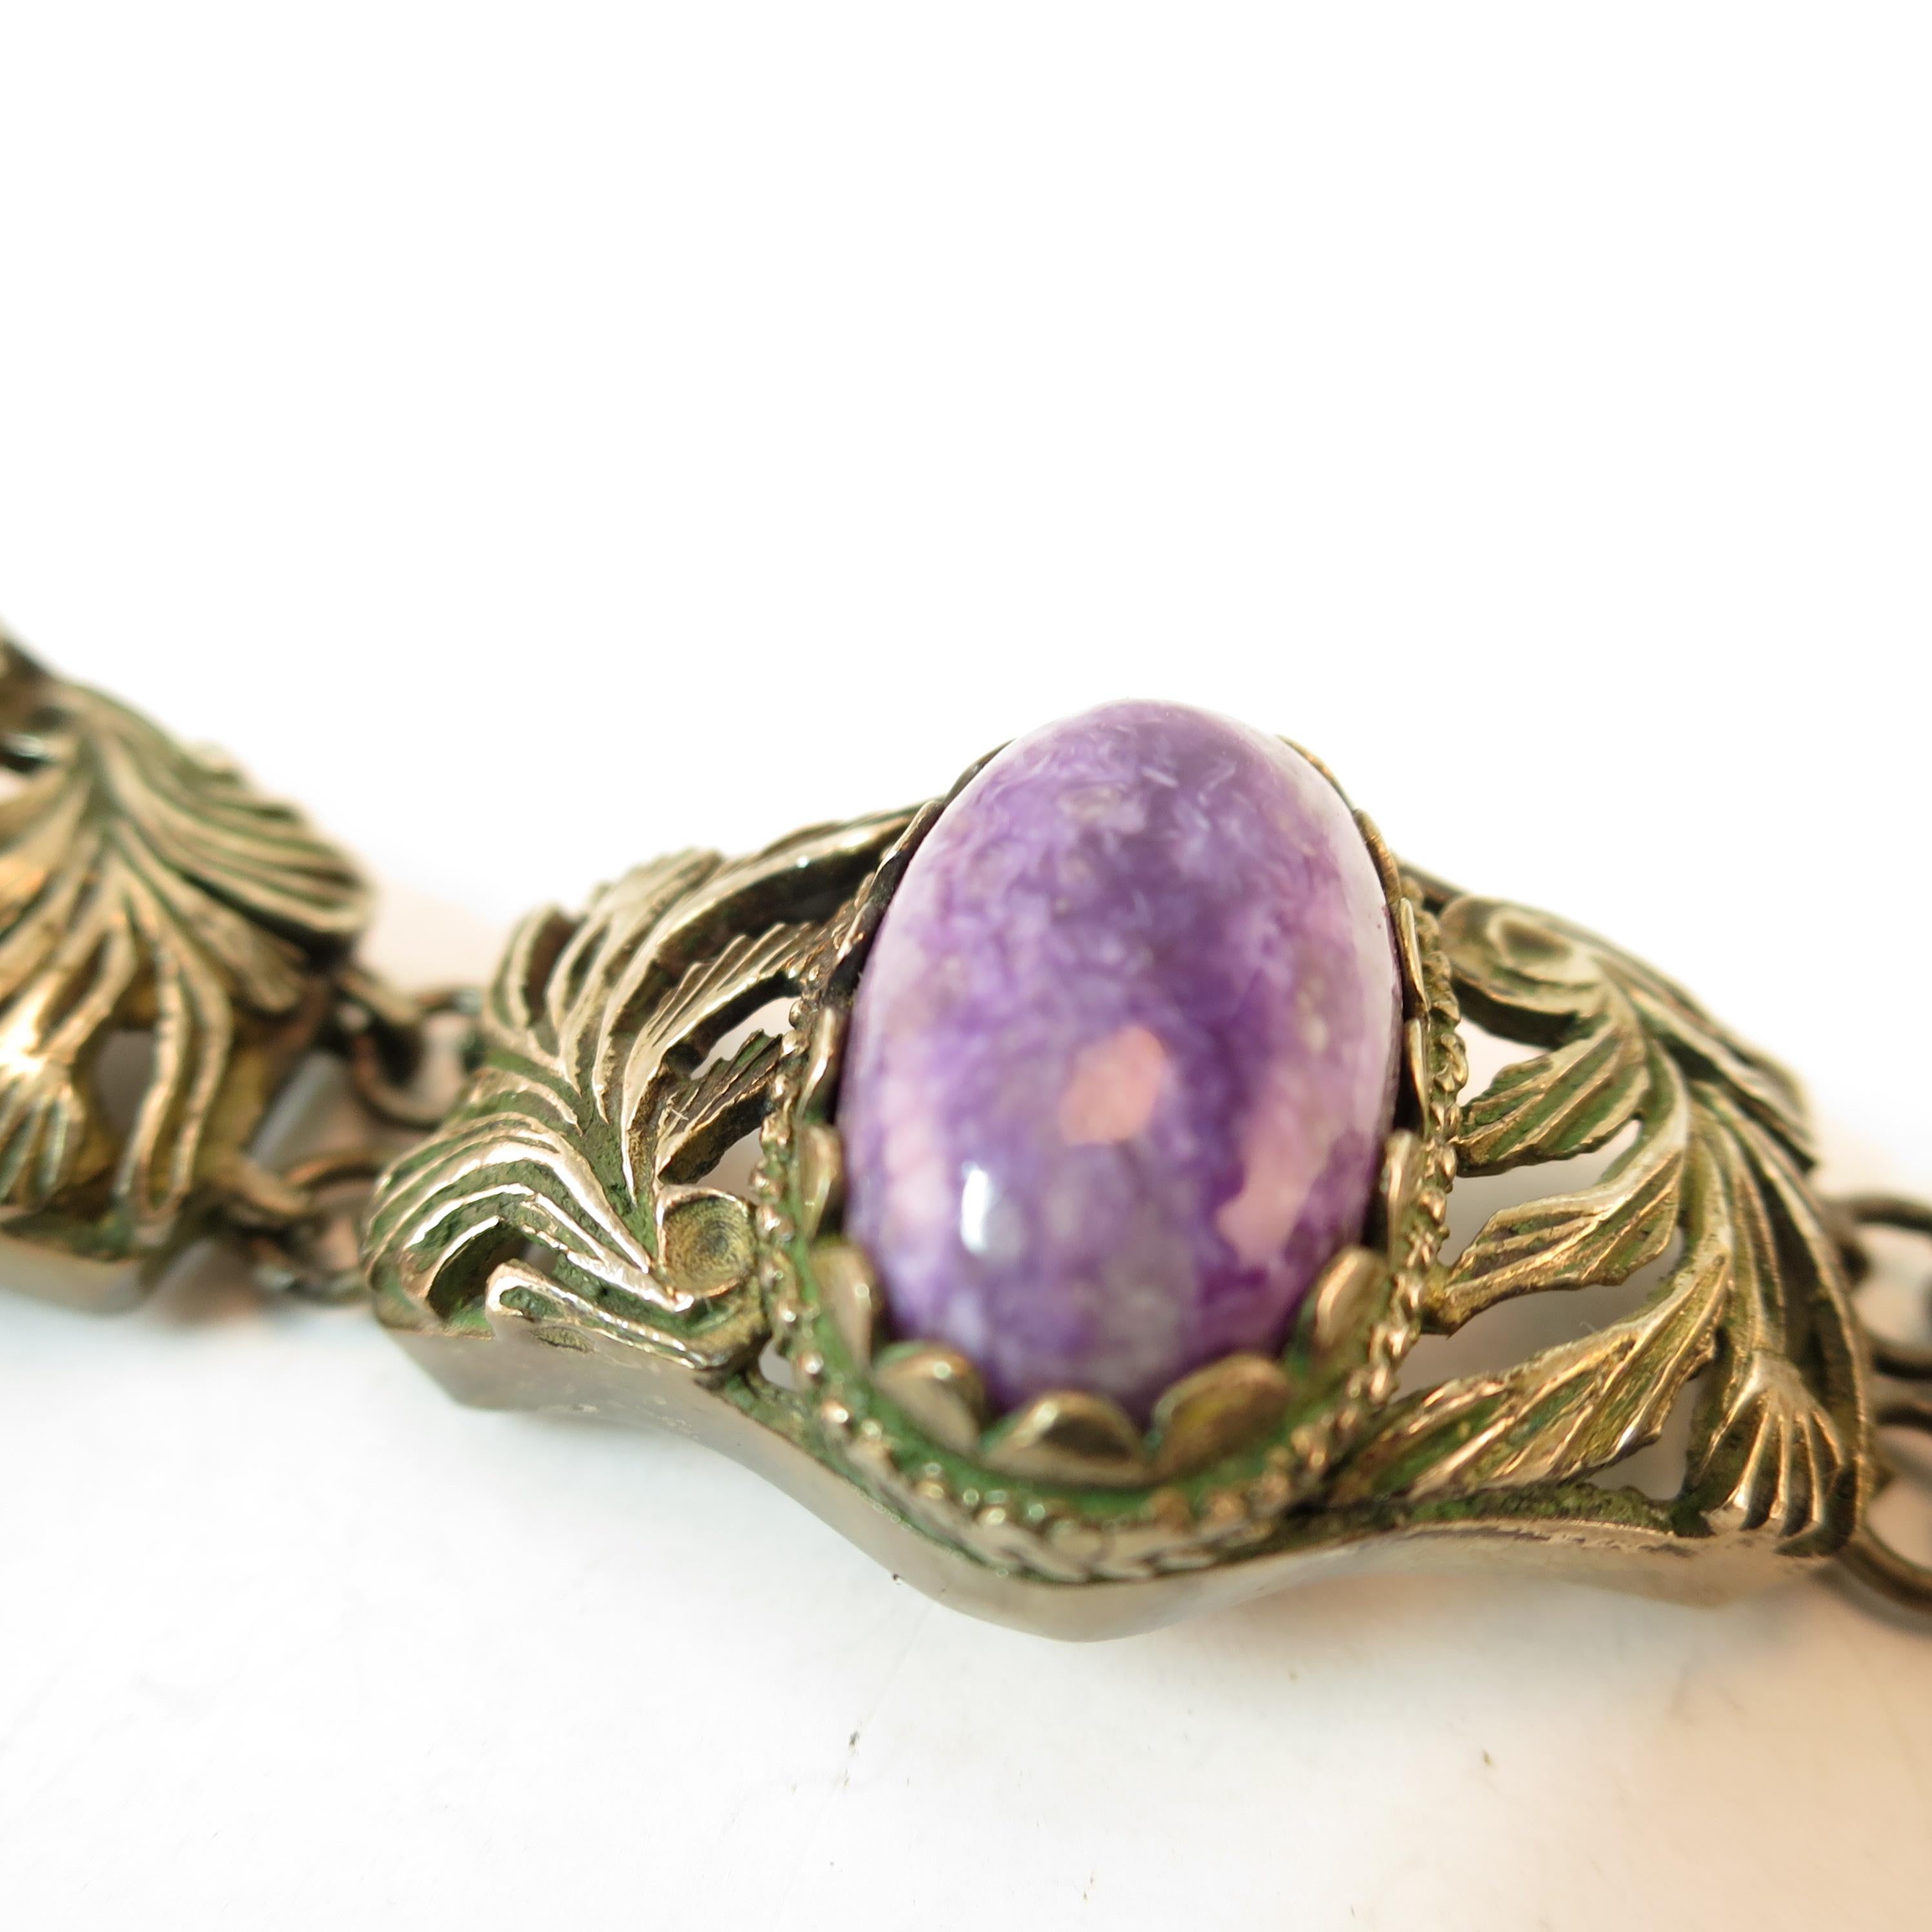 Victorian Chinese Export Silver & Amethyst Link Bracelet, Circa 1860s For Sale 2